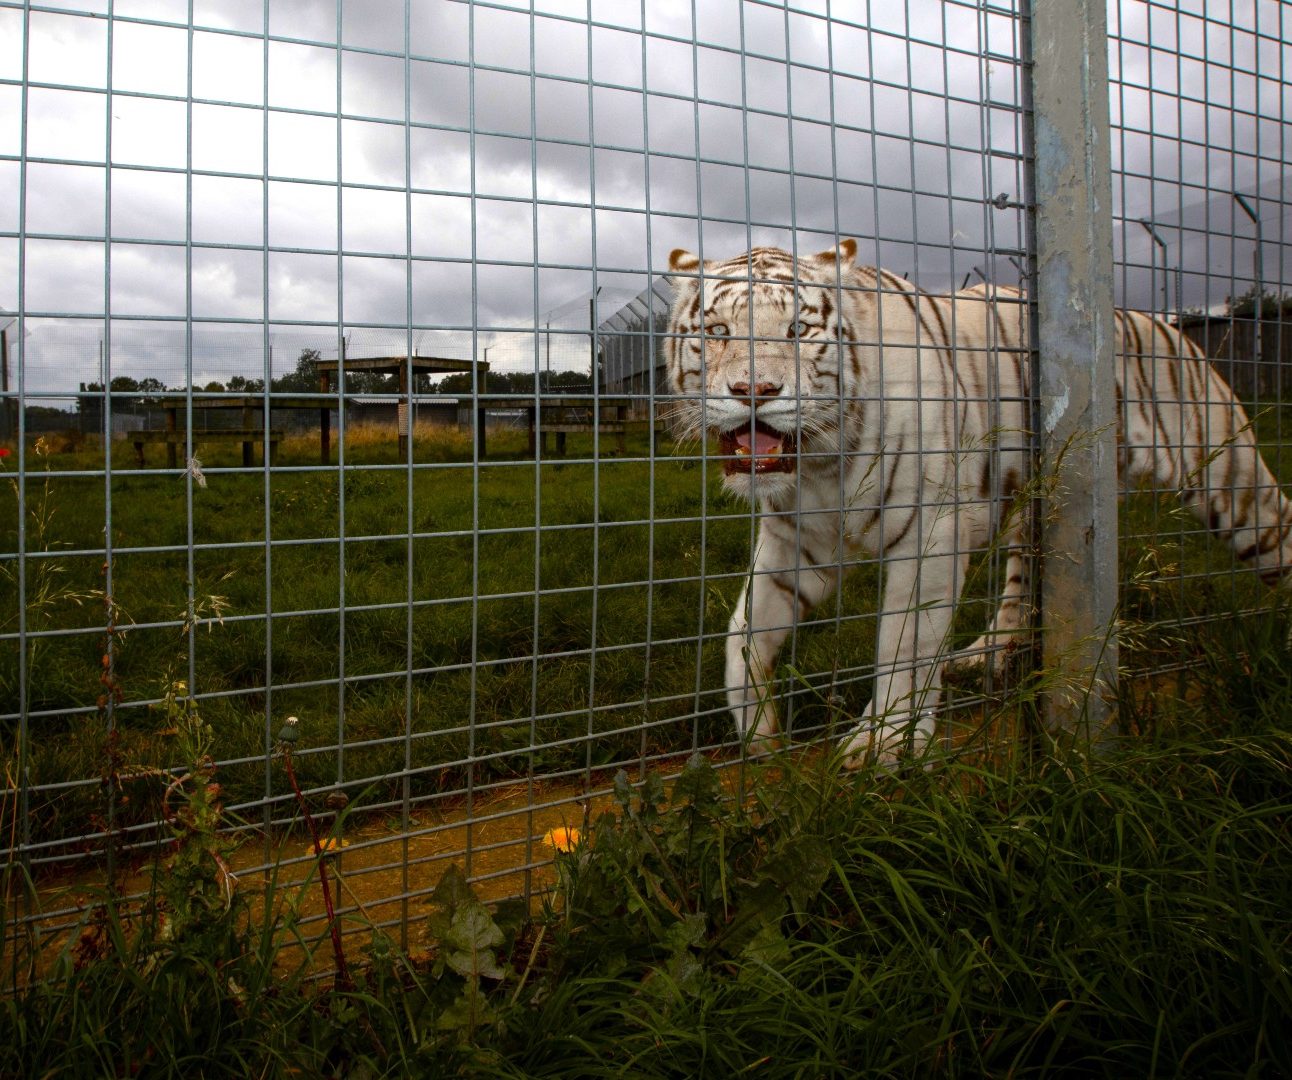 A white tiger in a zoo enclosure